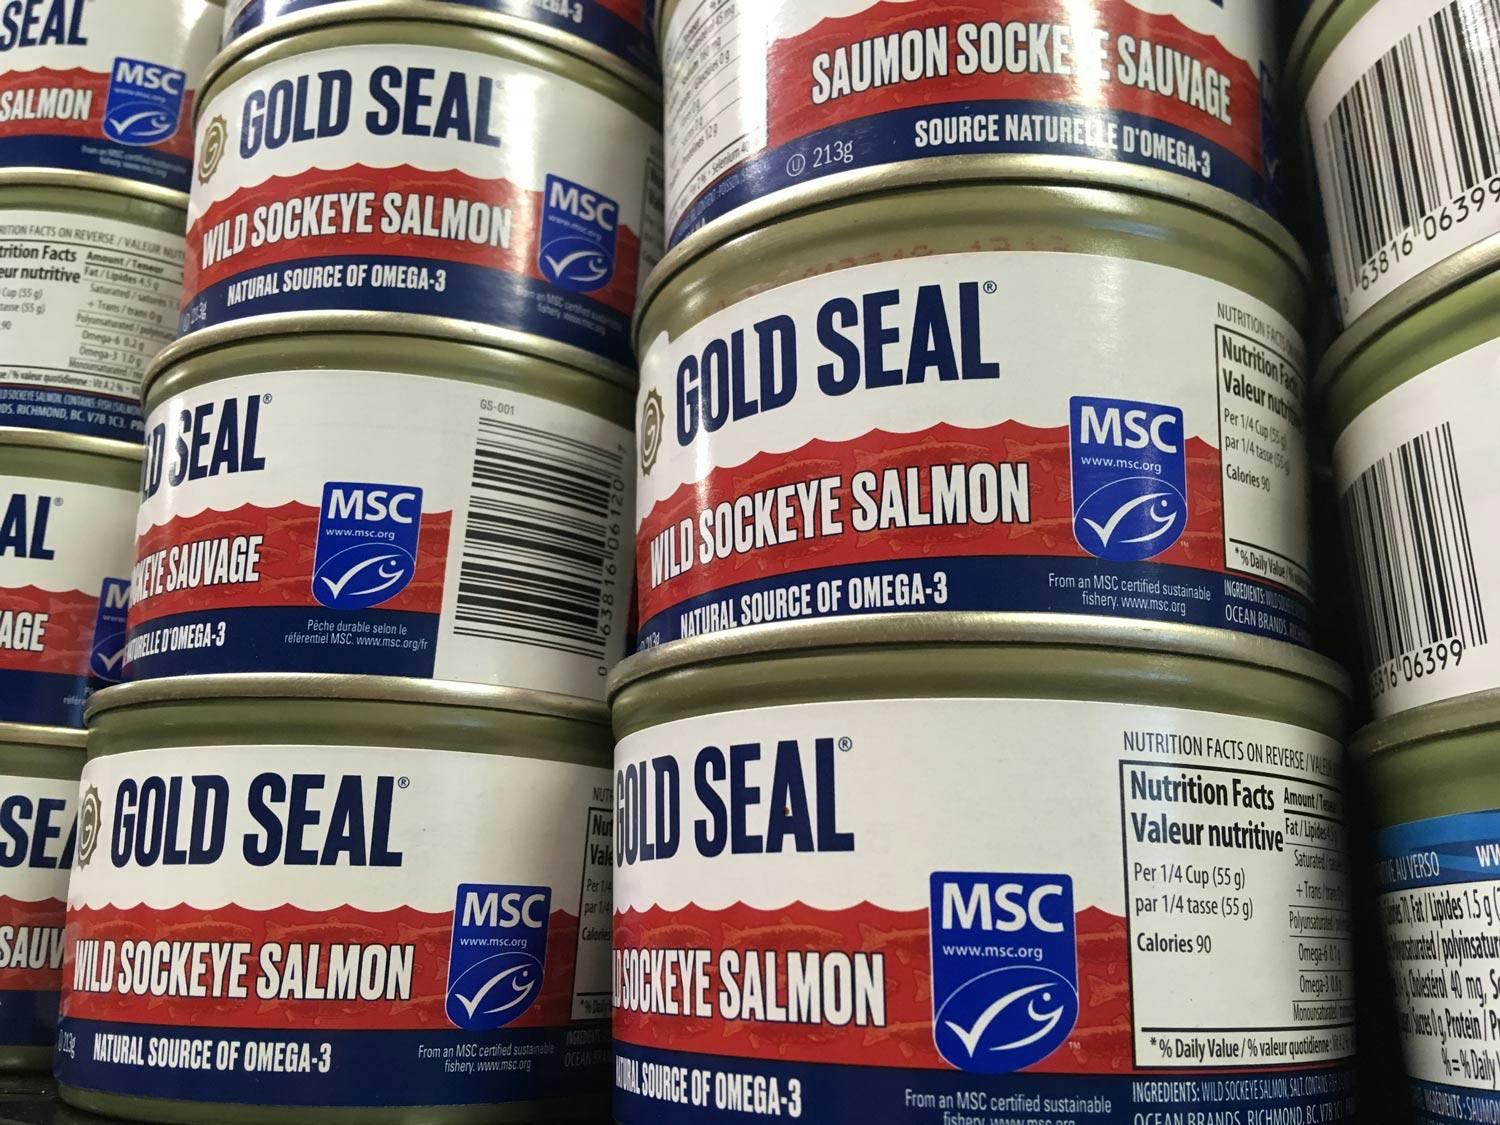 Stacked cans of Gold Seal wild sockeye salmon. Each can has a blue MSC label bearing a small white emblem of a fish.